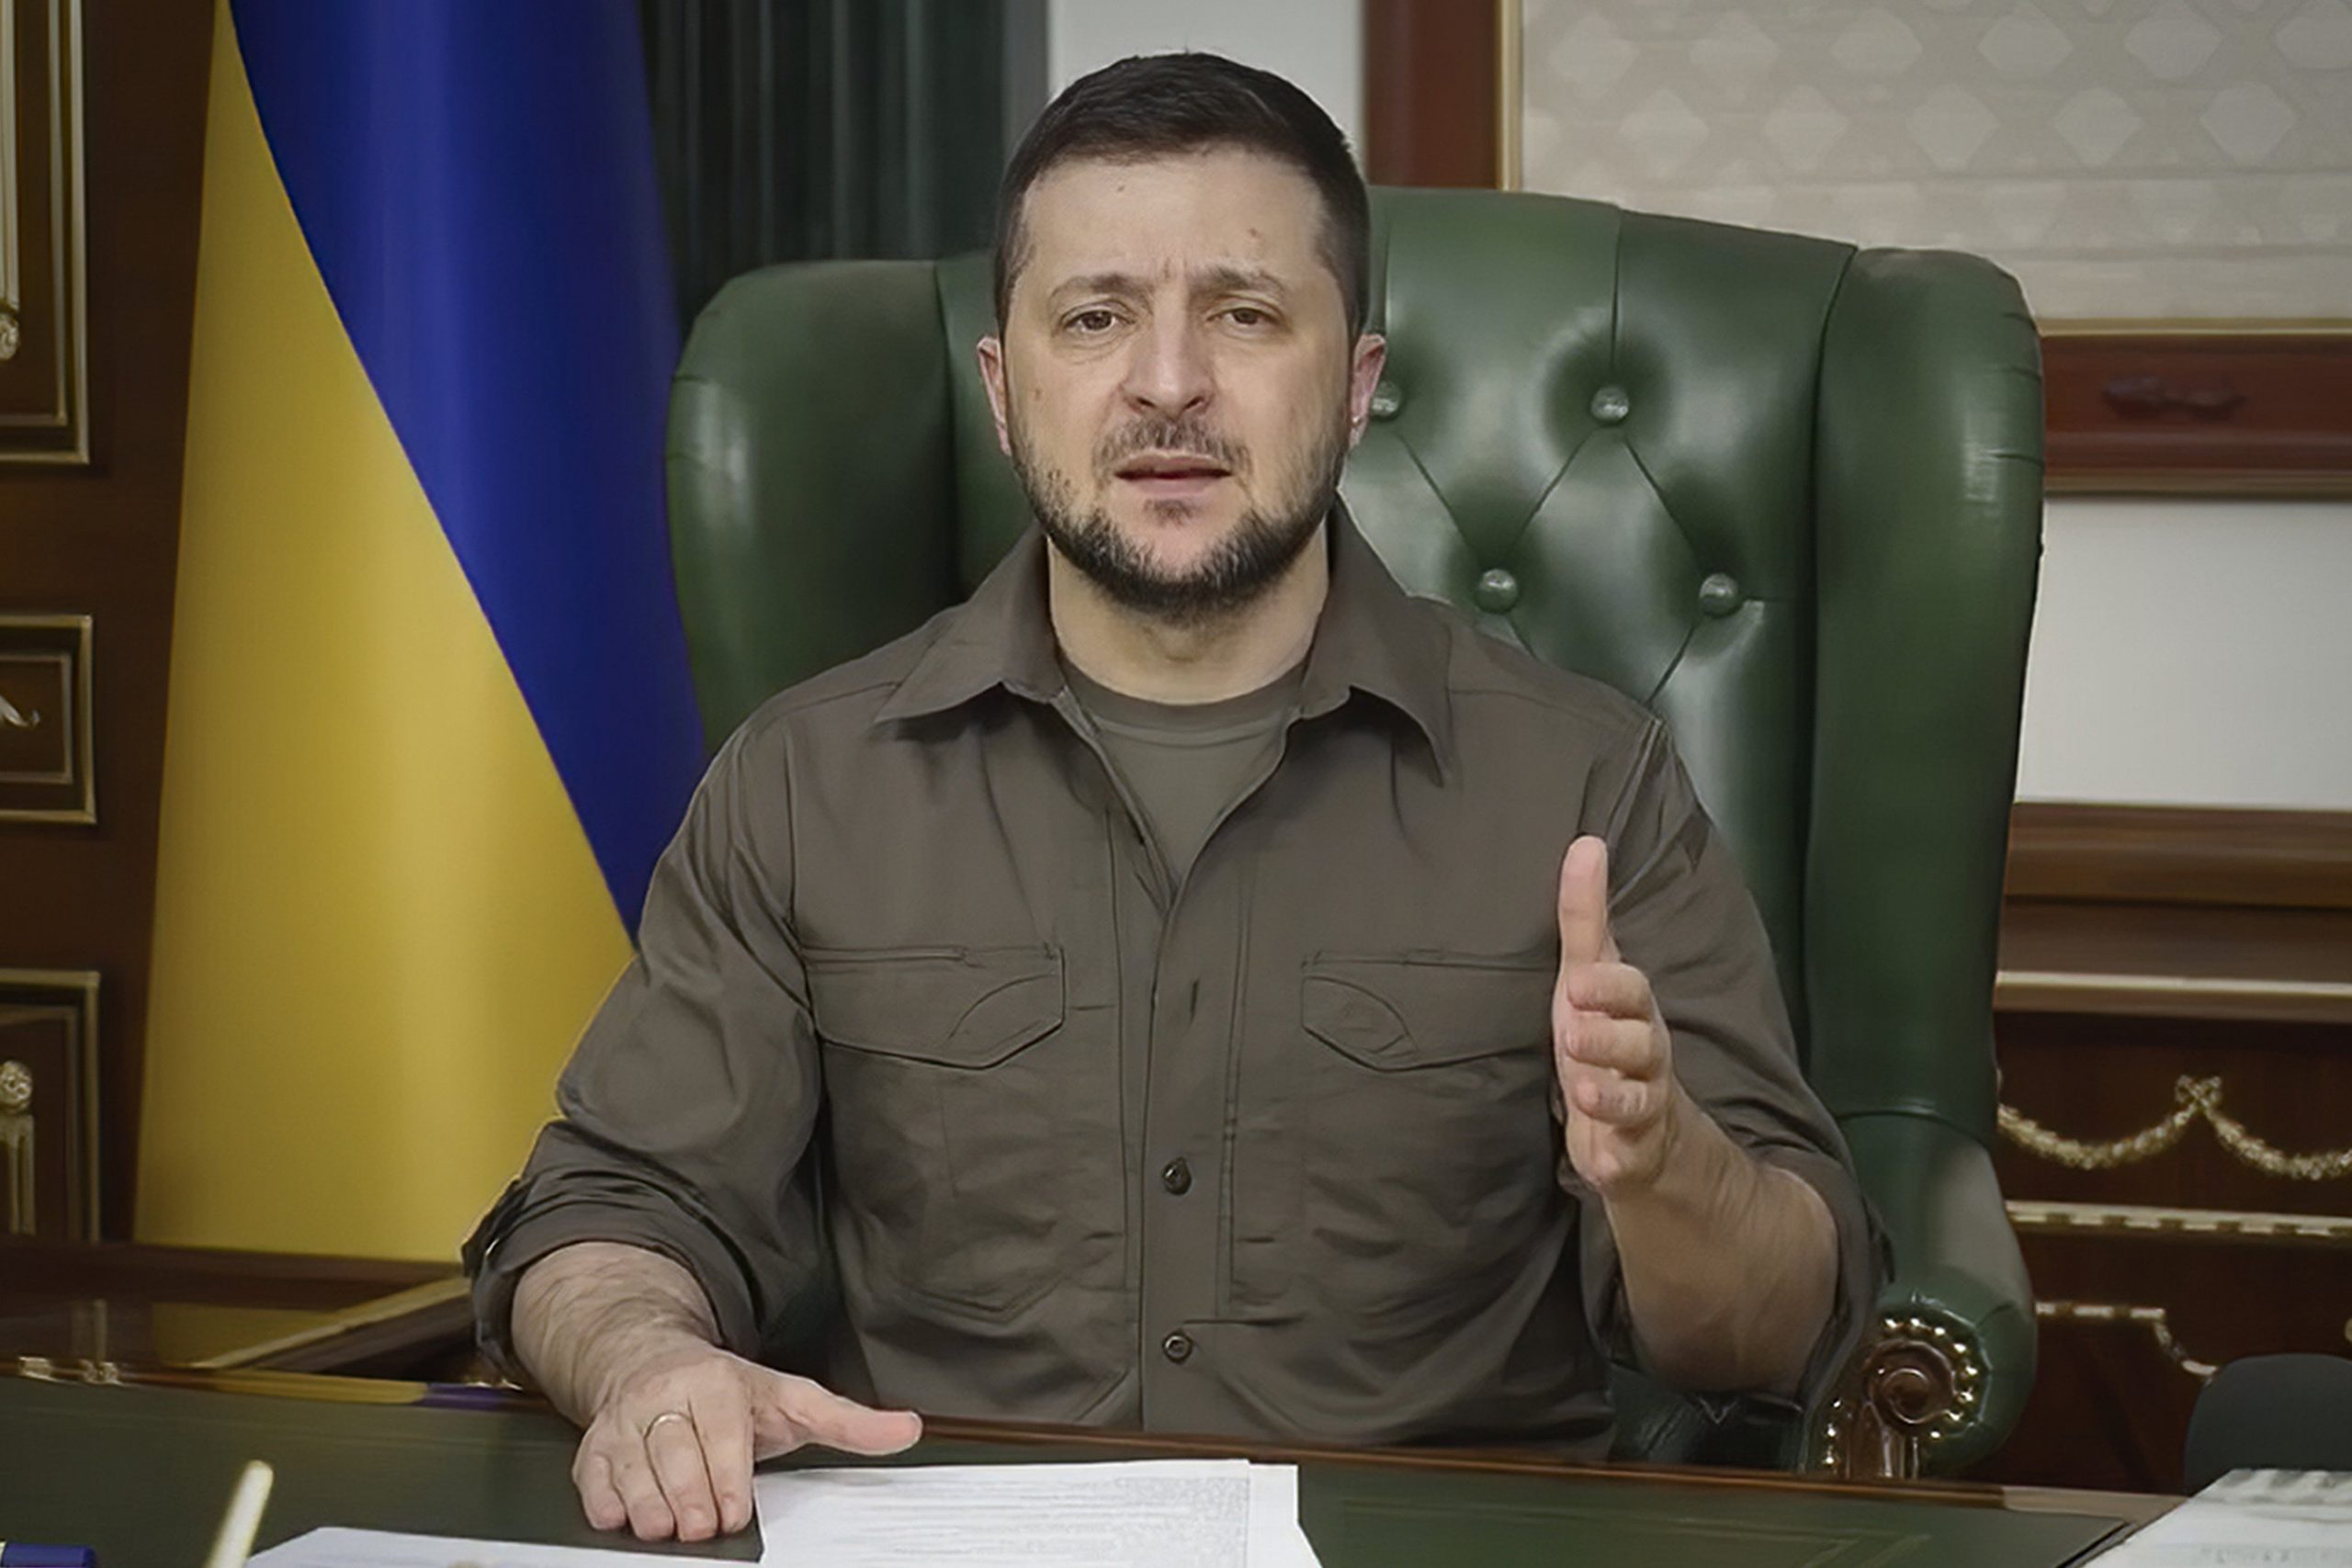 Zelensky Confronts Orbán Government Again